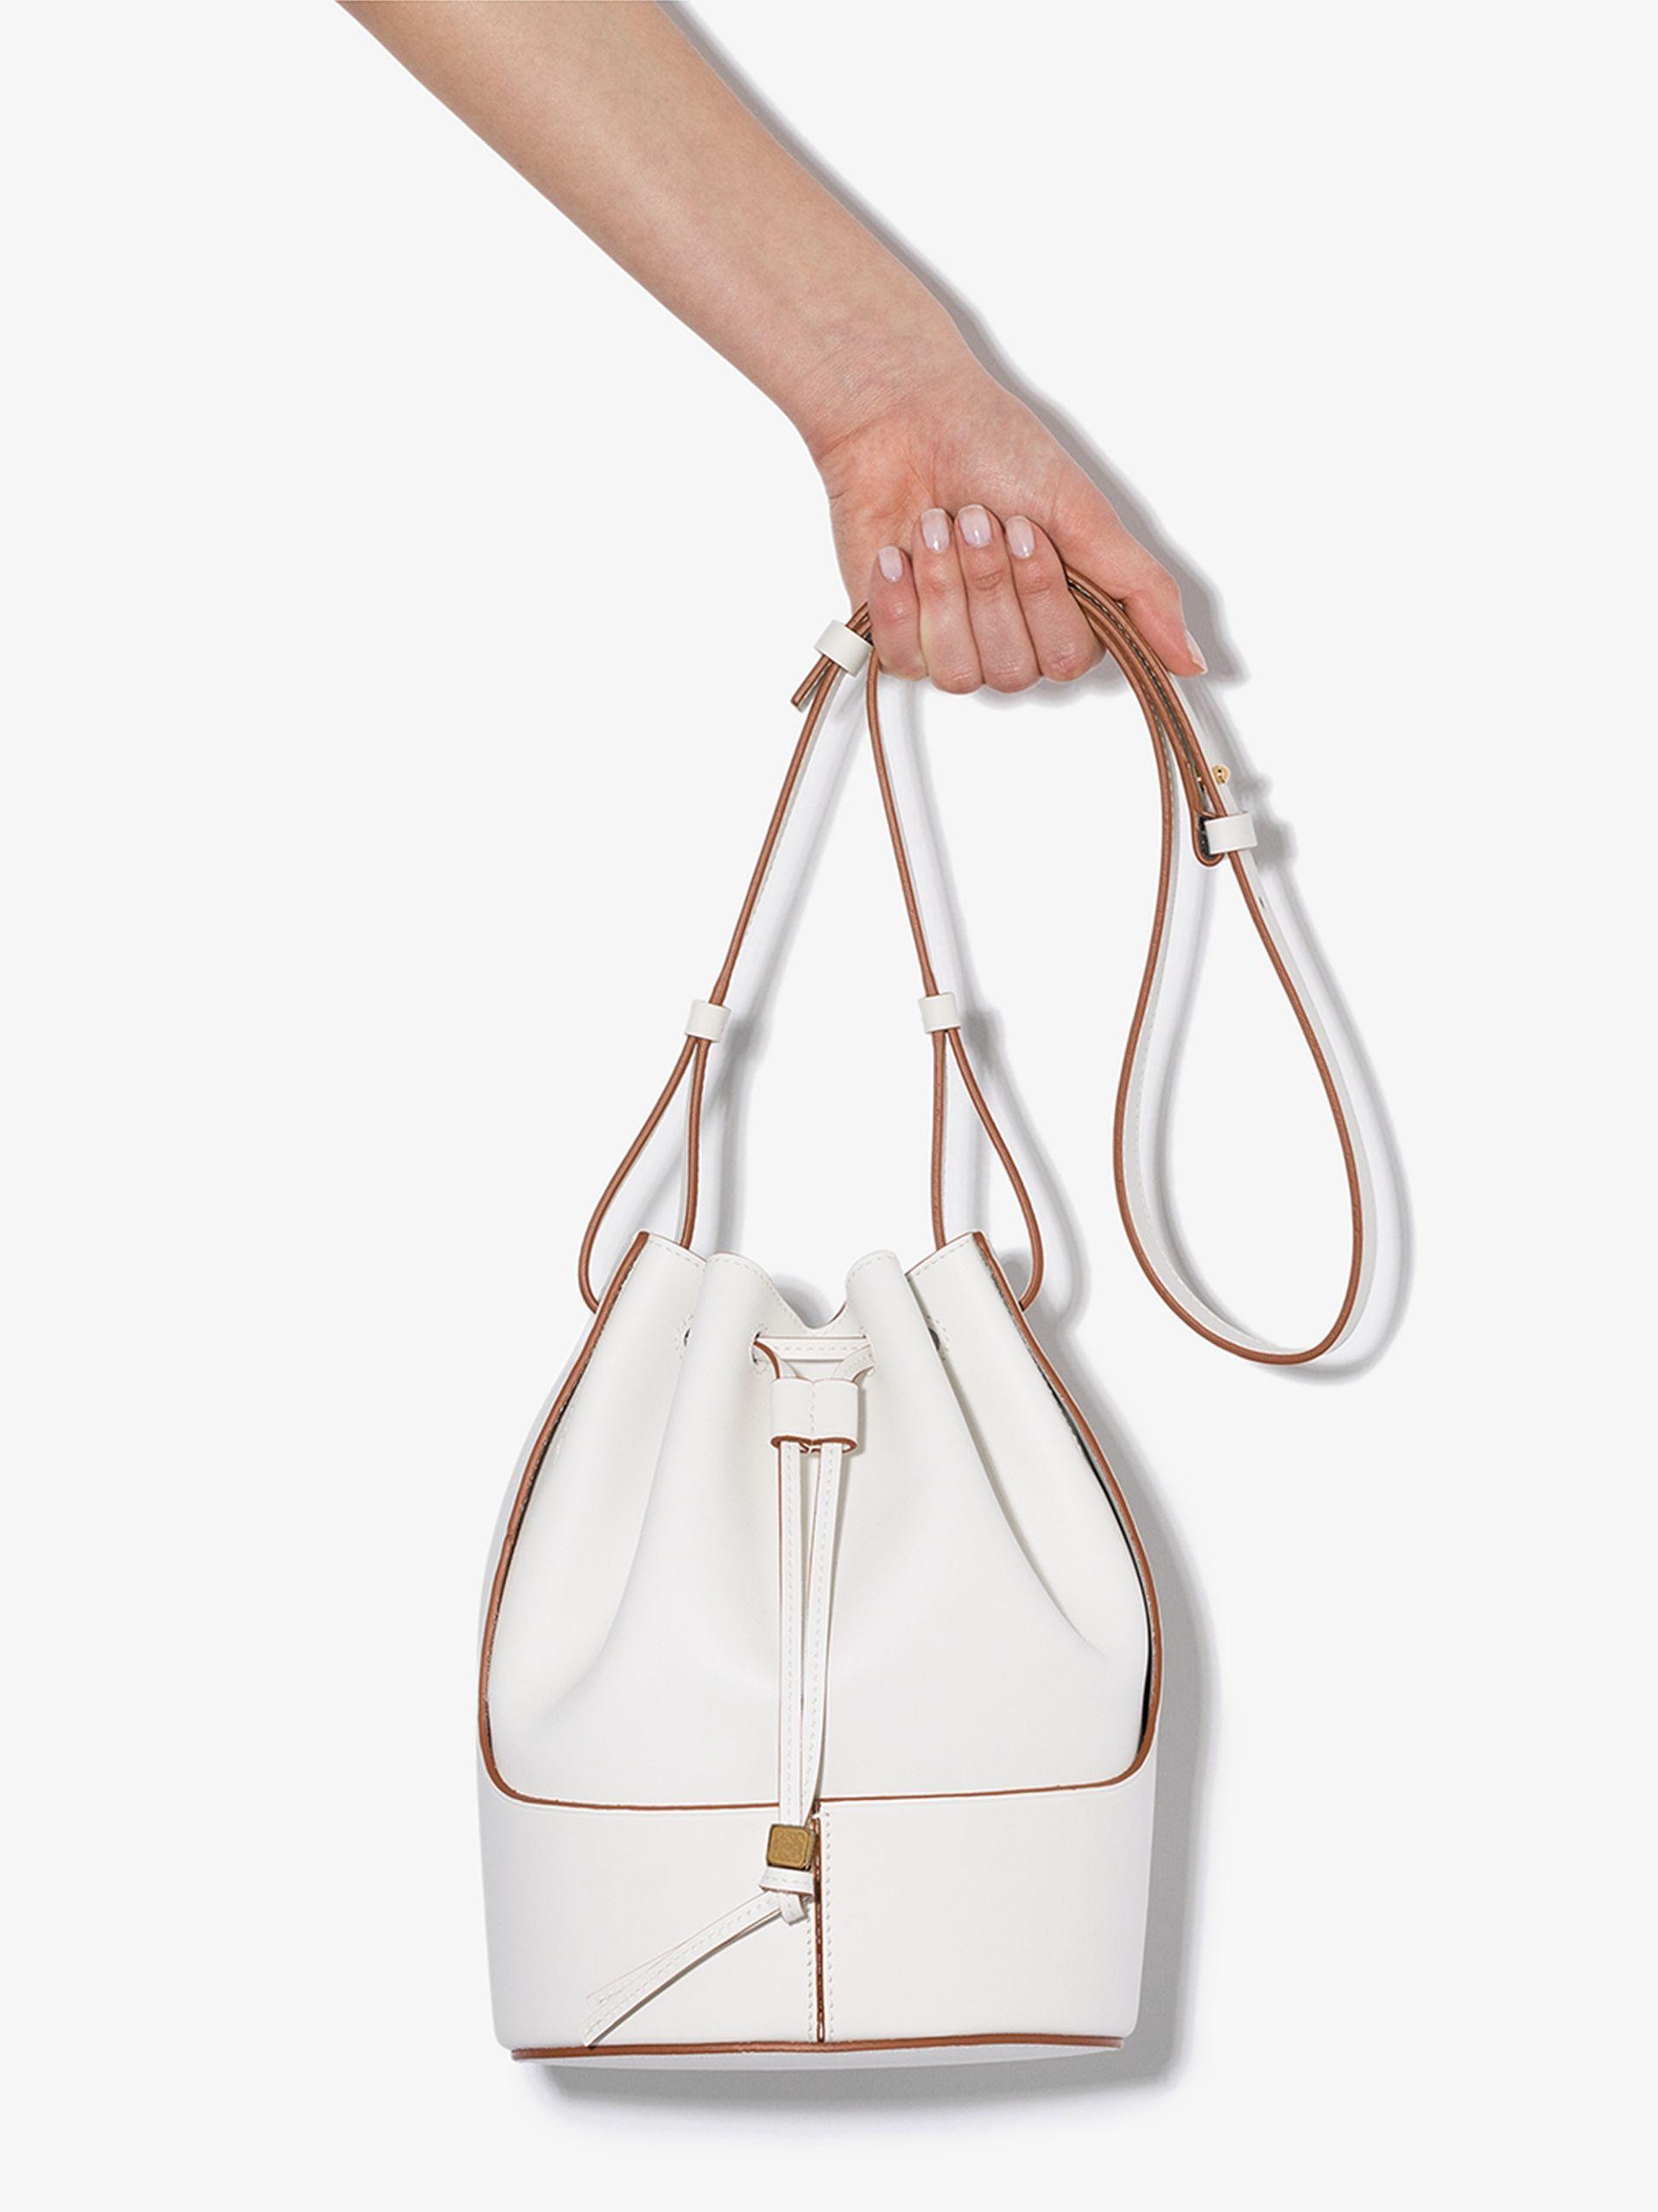 Loewe Balloon Small Leather Shoulder Bag in Soft White (White 